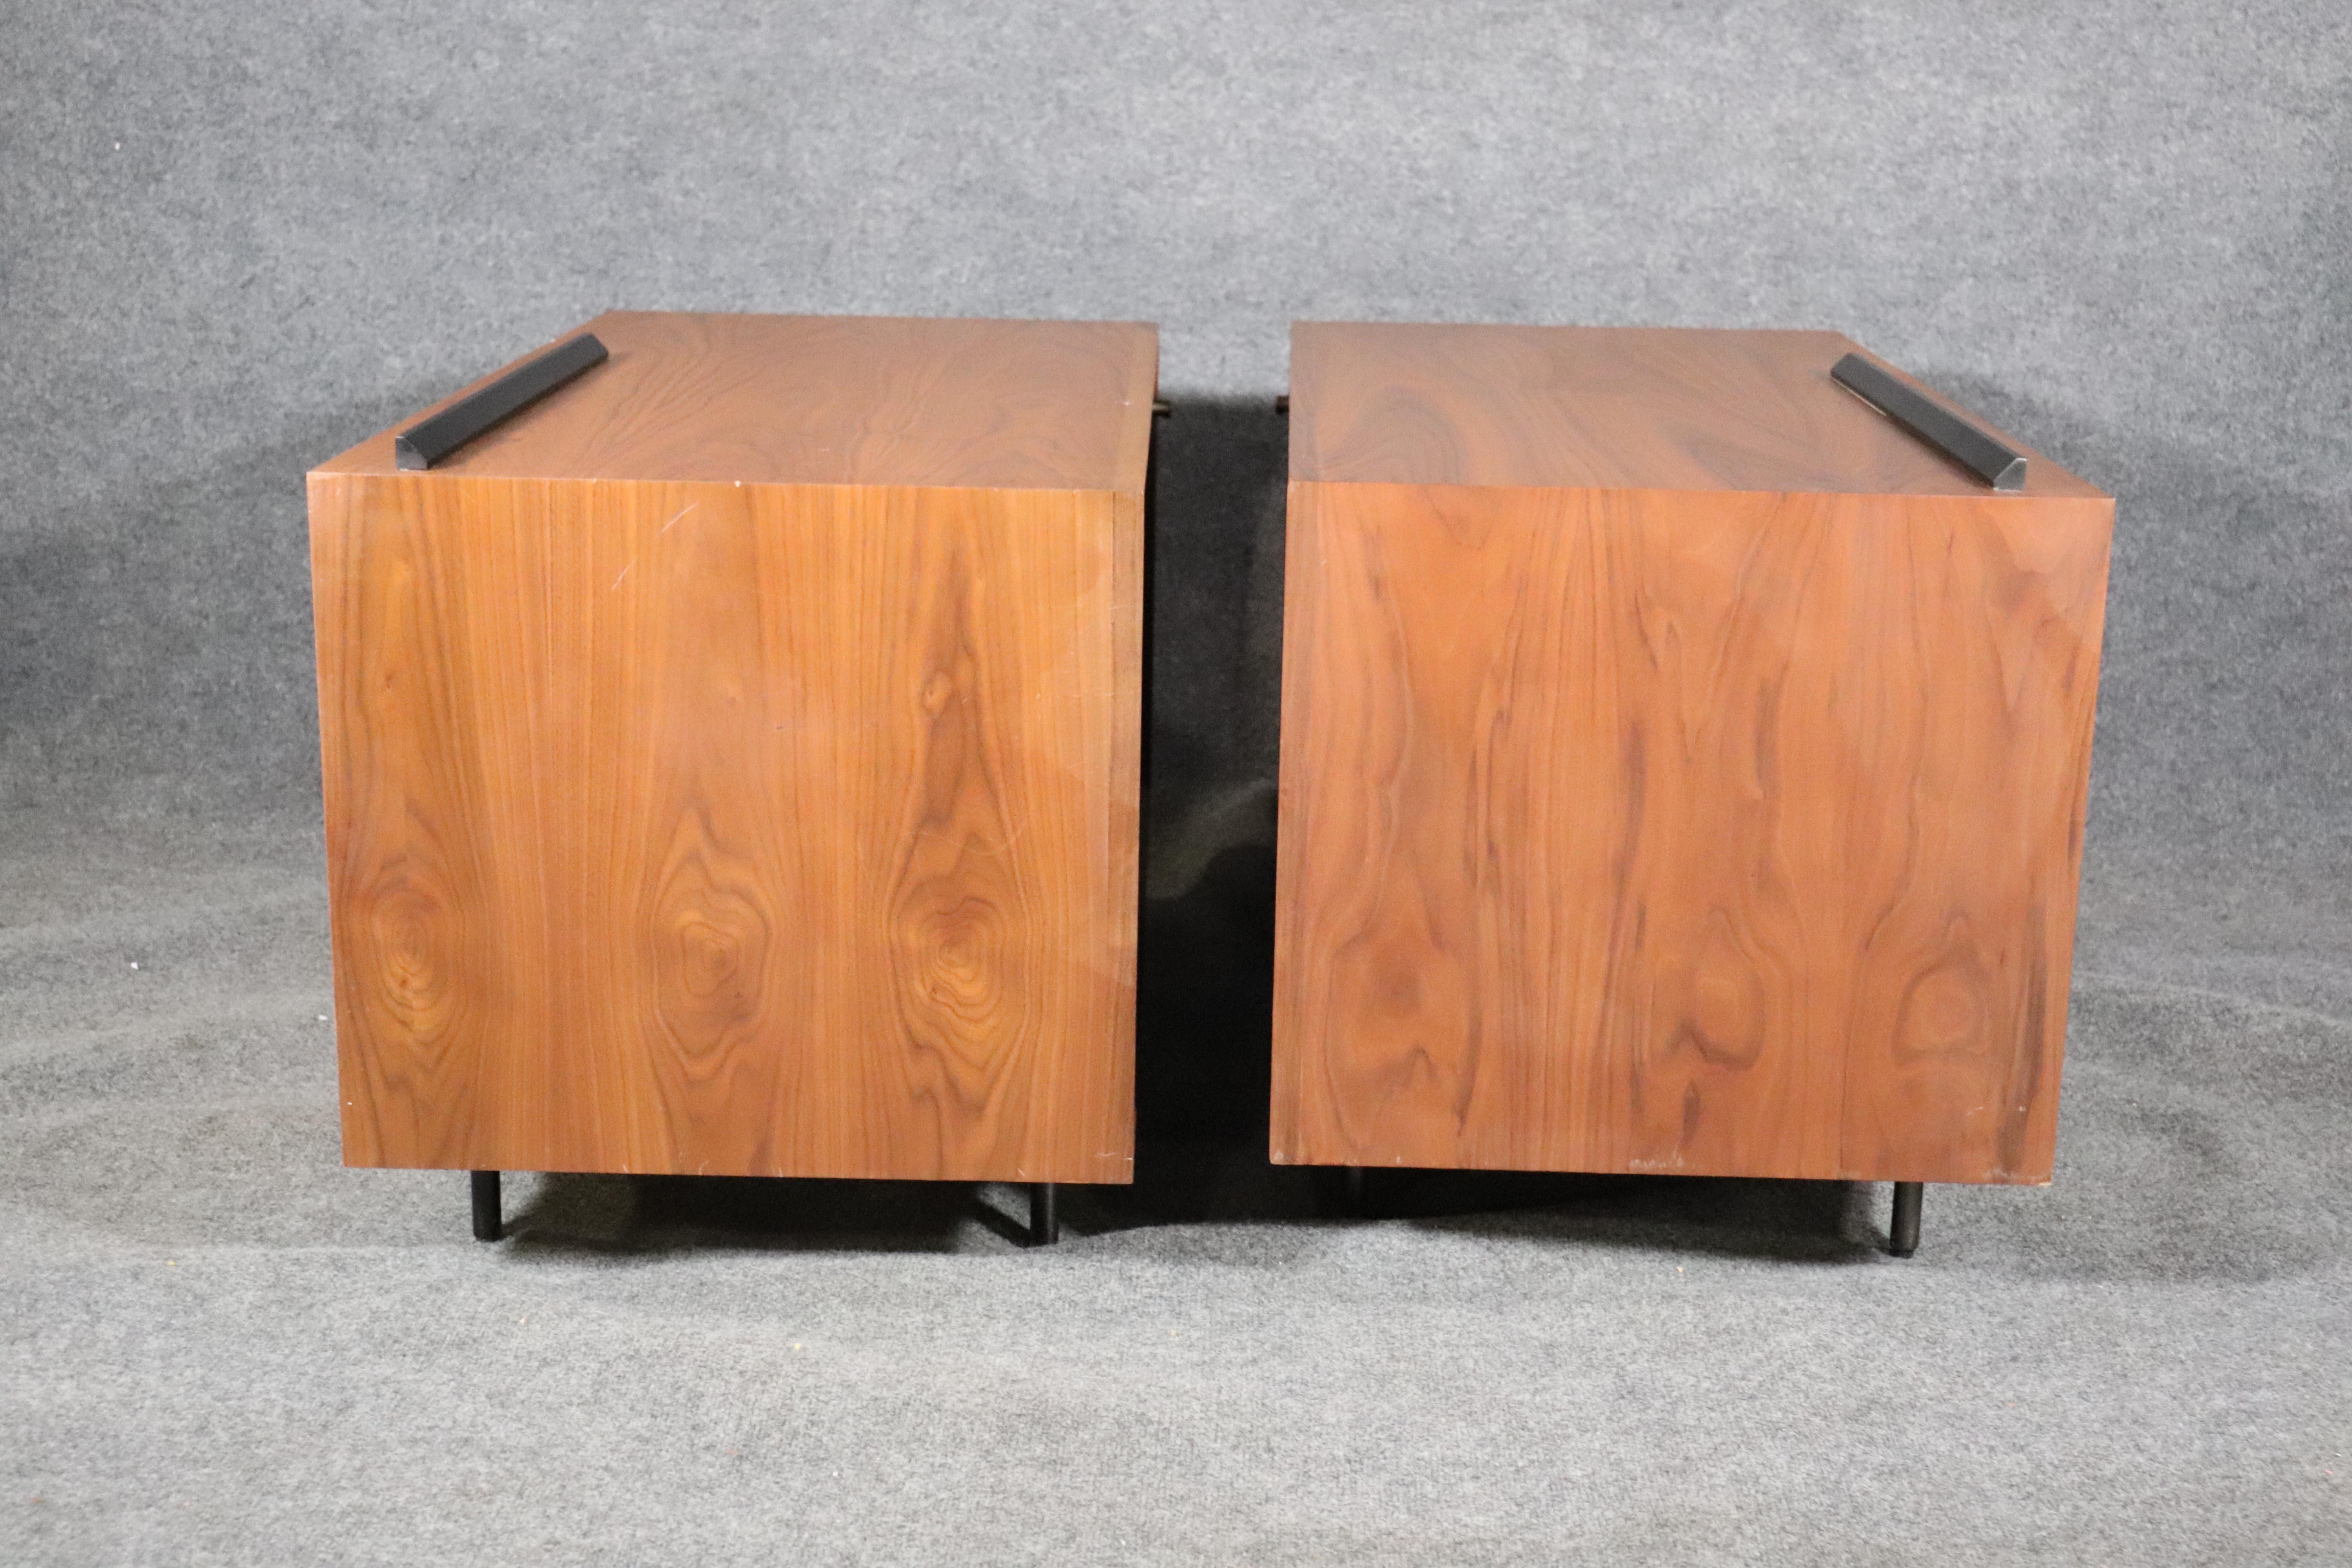 Matching Teak Cabinets In Good Condition For Sale In Brooklyn, NY